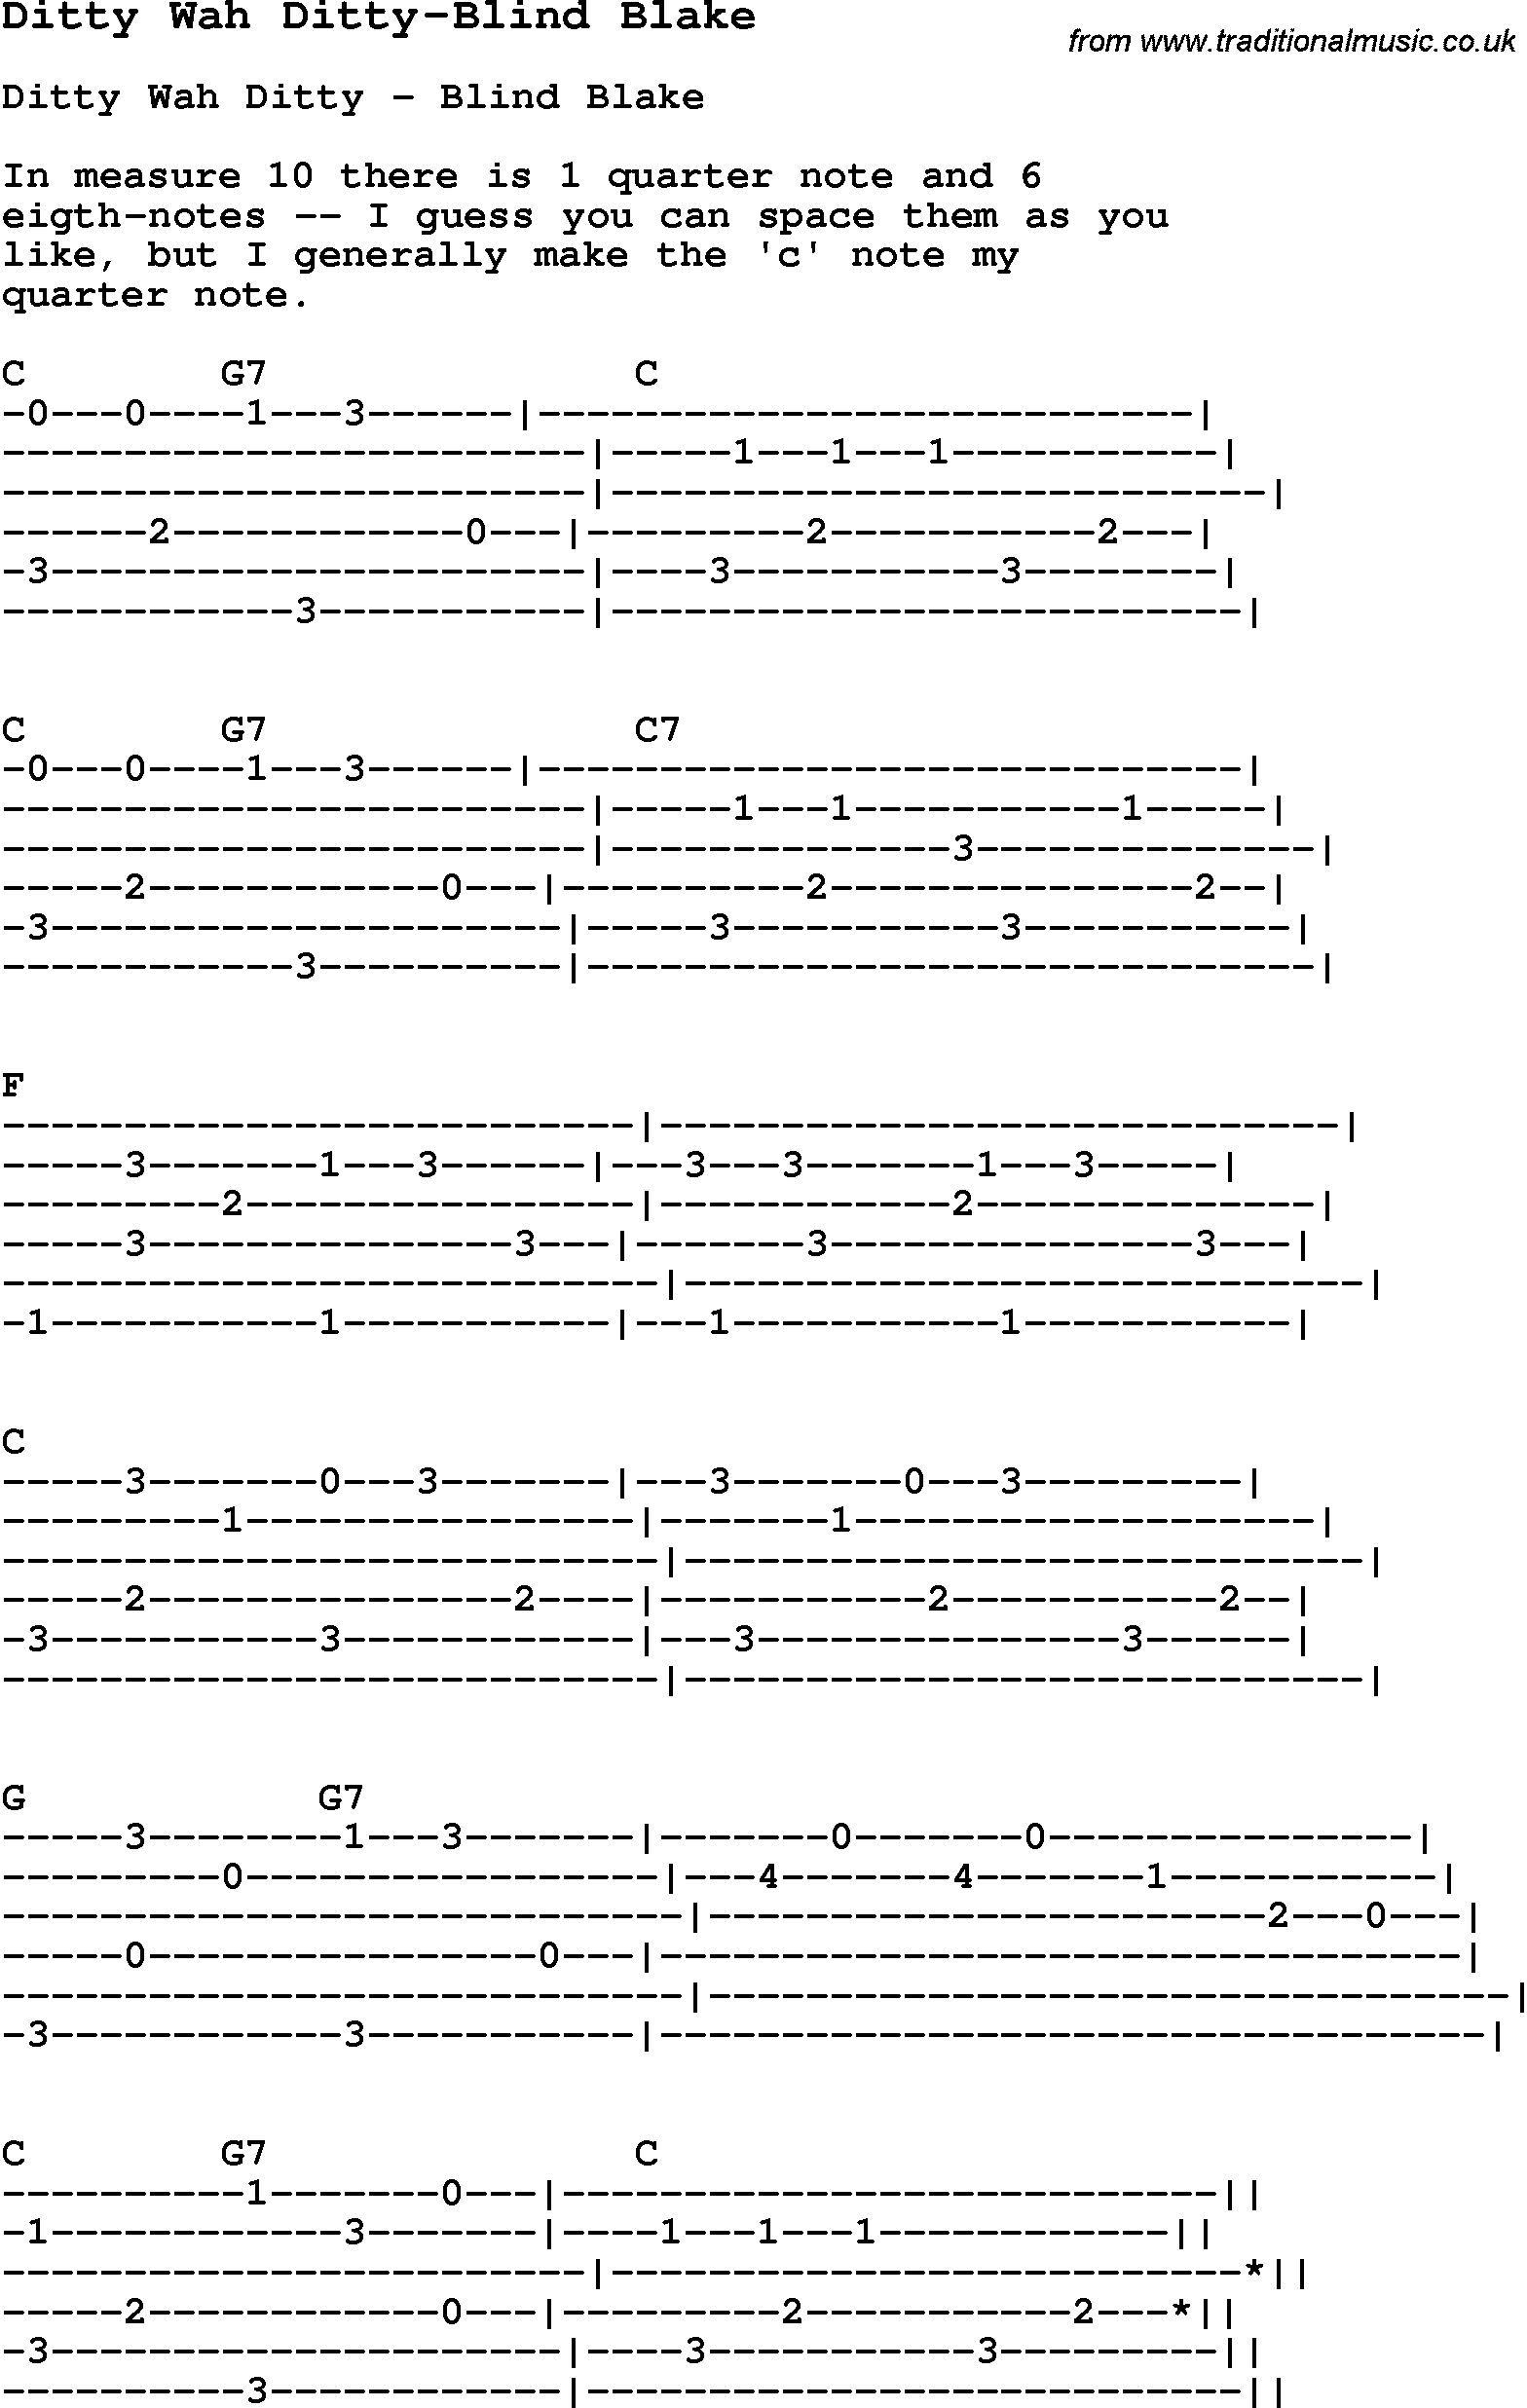 Blues Guitar Song, lyrics, chords, tablature, playing hints for Ditty Wah Ditty-Blind Blake